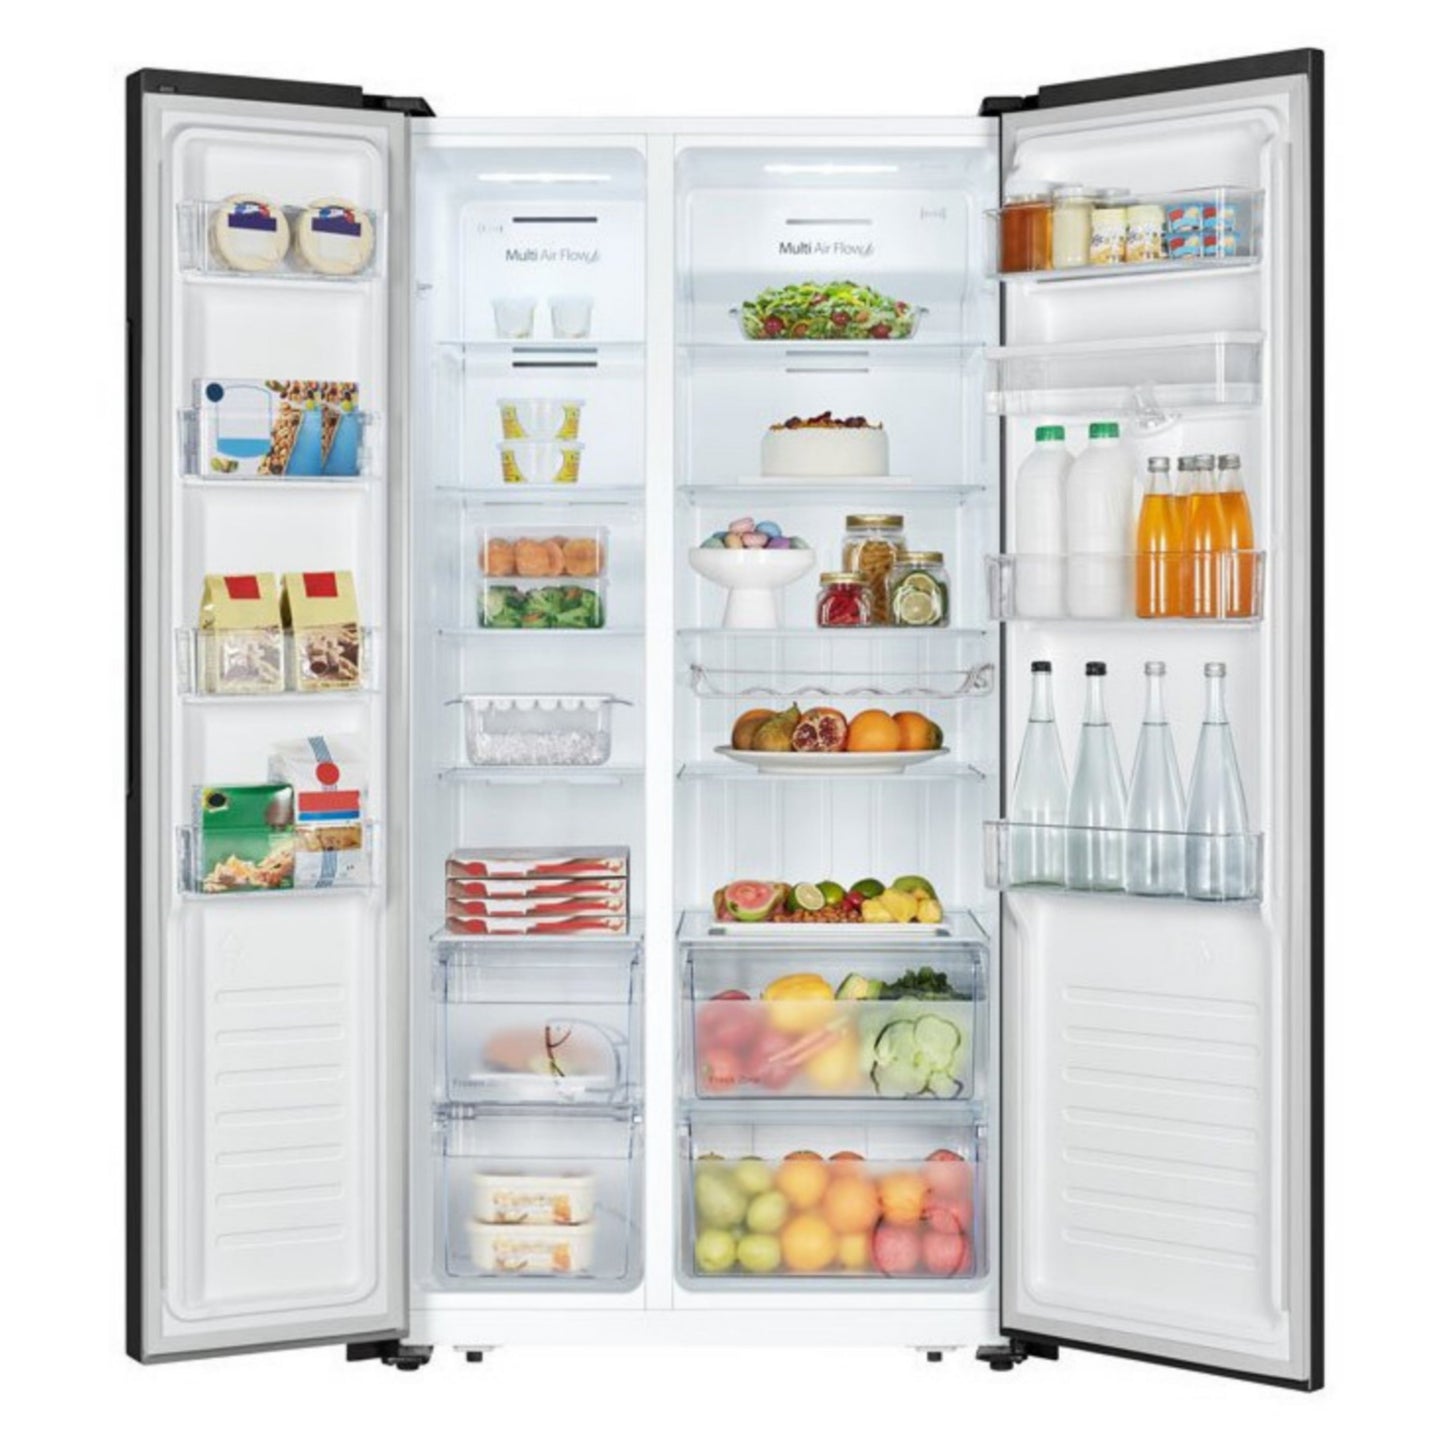 Hisense REF 67WSBG 508L Side by Side Refrigerator with LED display + 1 Year Warranty - Brand New